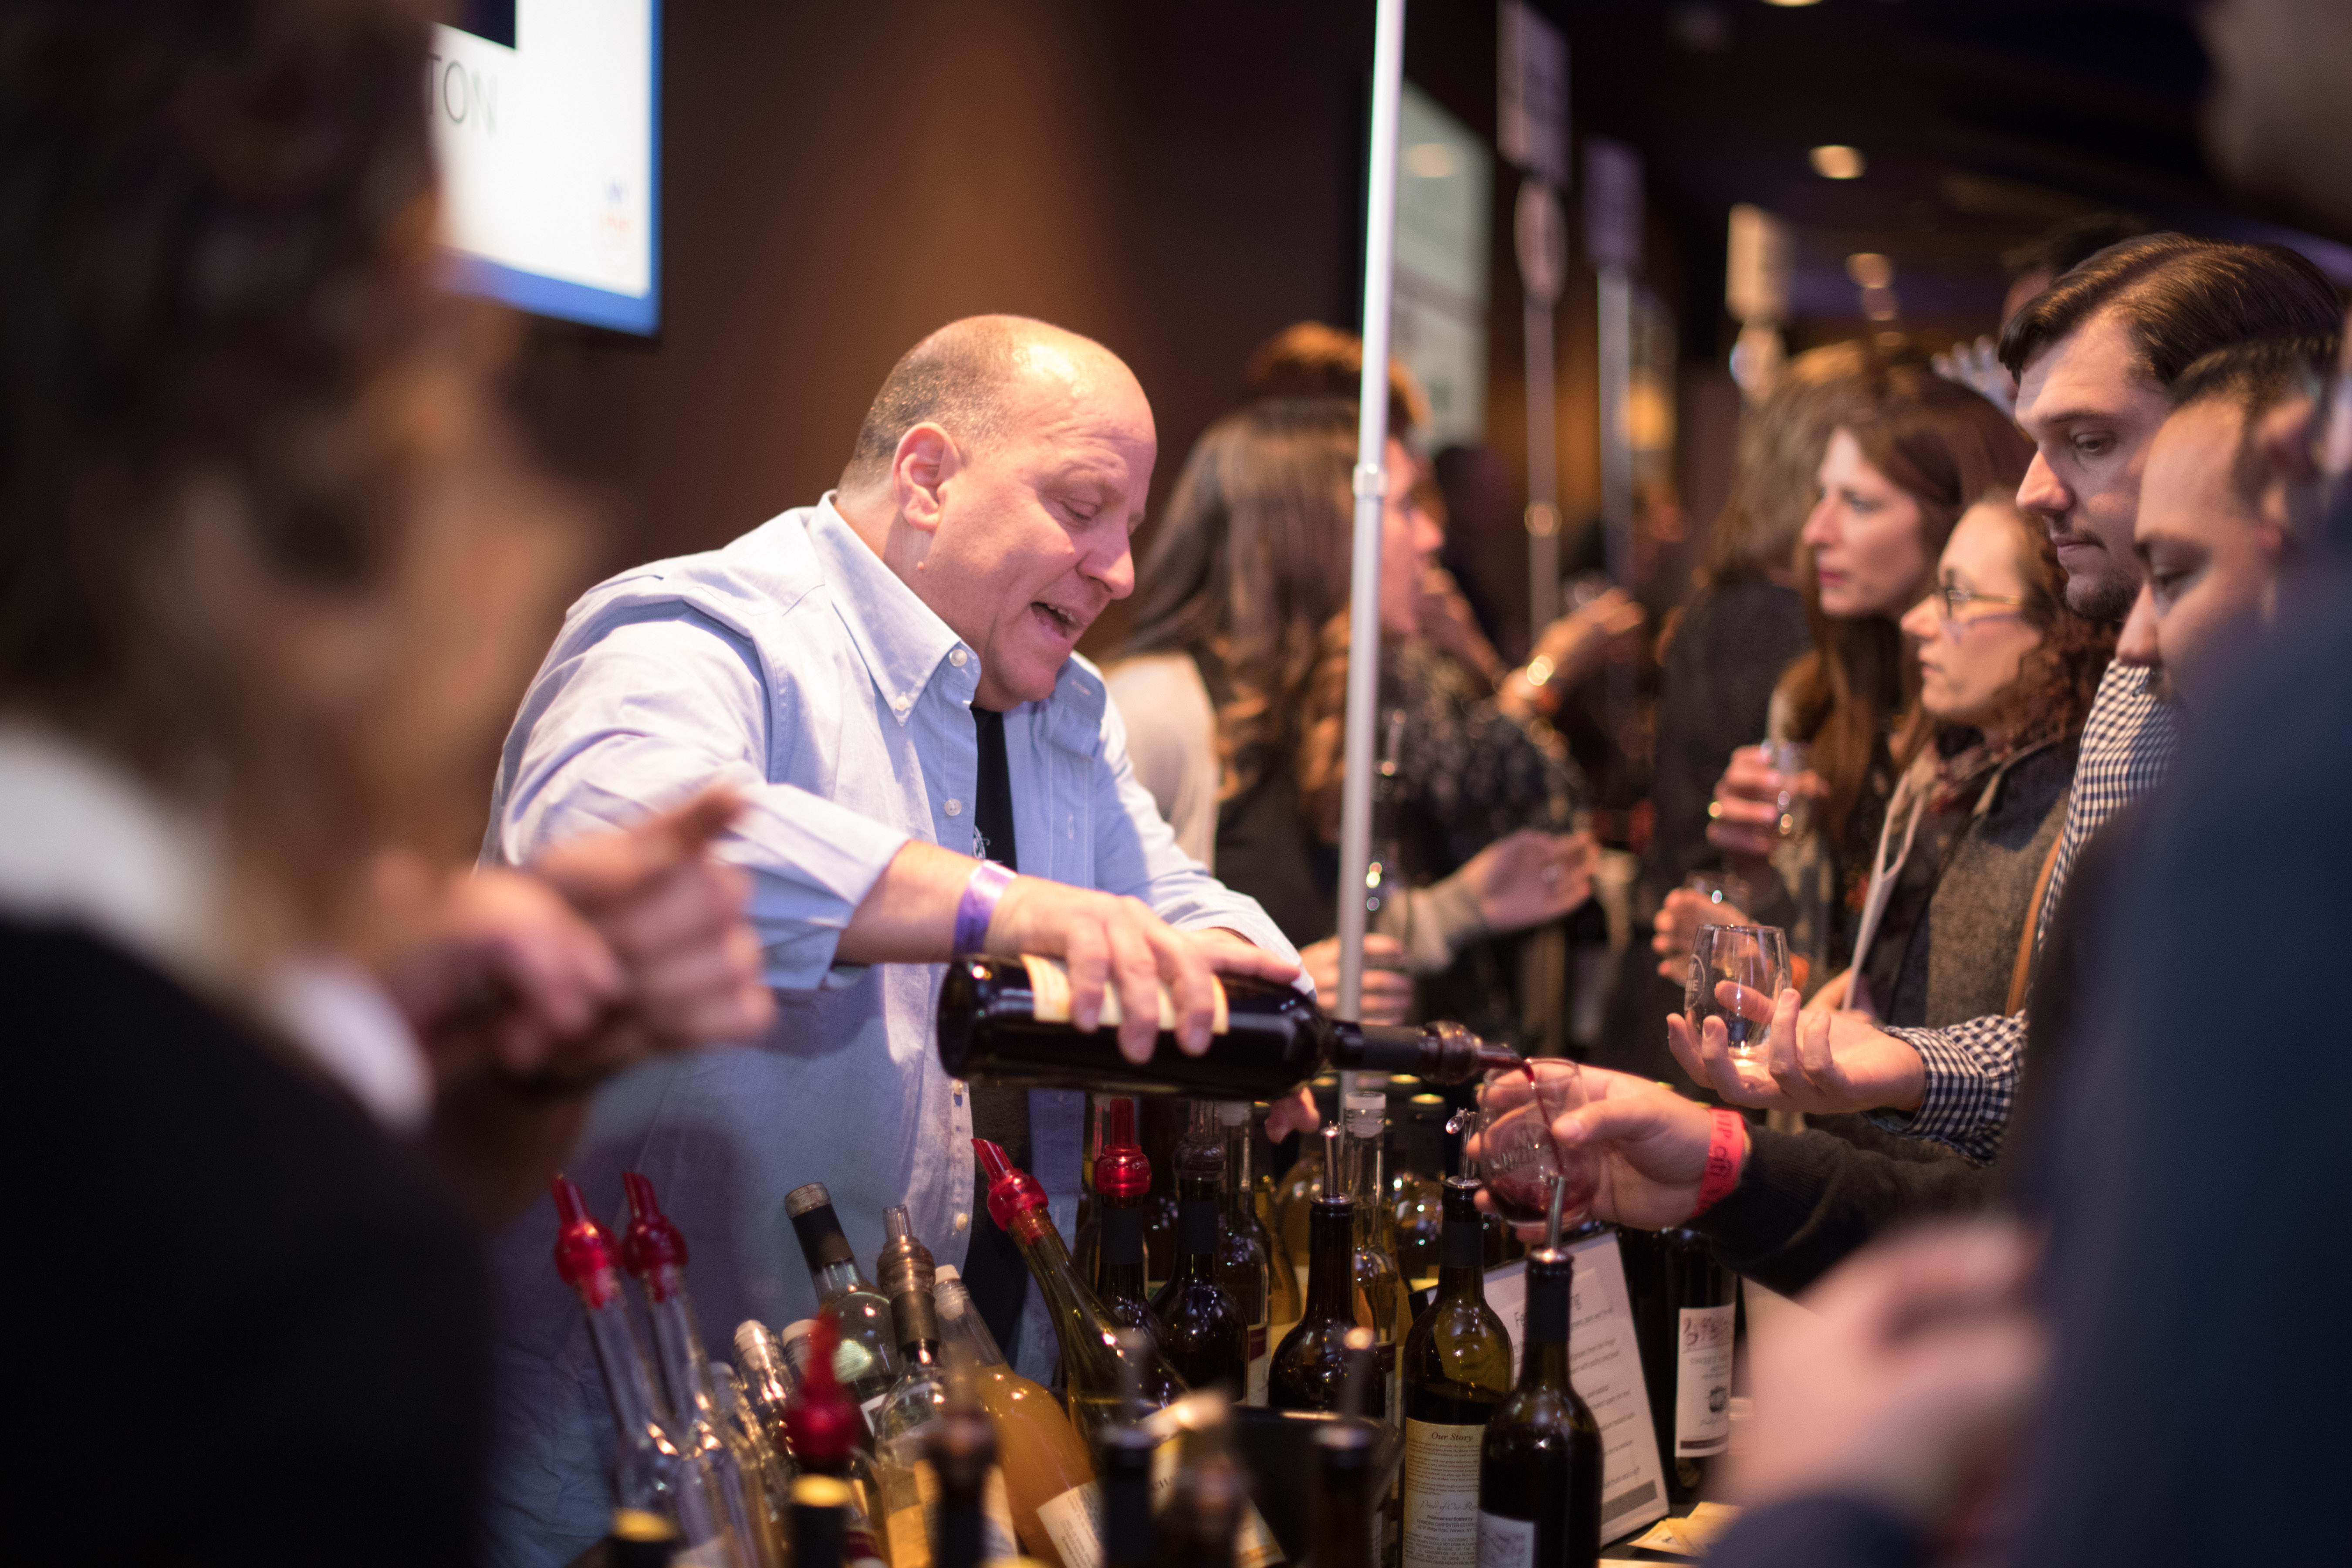 The NYC Winter Wine Festival presented by Citi returns to the PlayStation Theater in Times Square, Saturday March 9. Find info & tickets at NewYorkWineEvents.com.